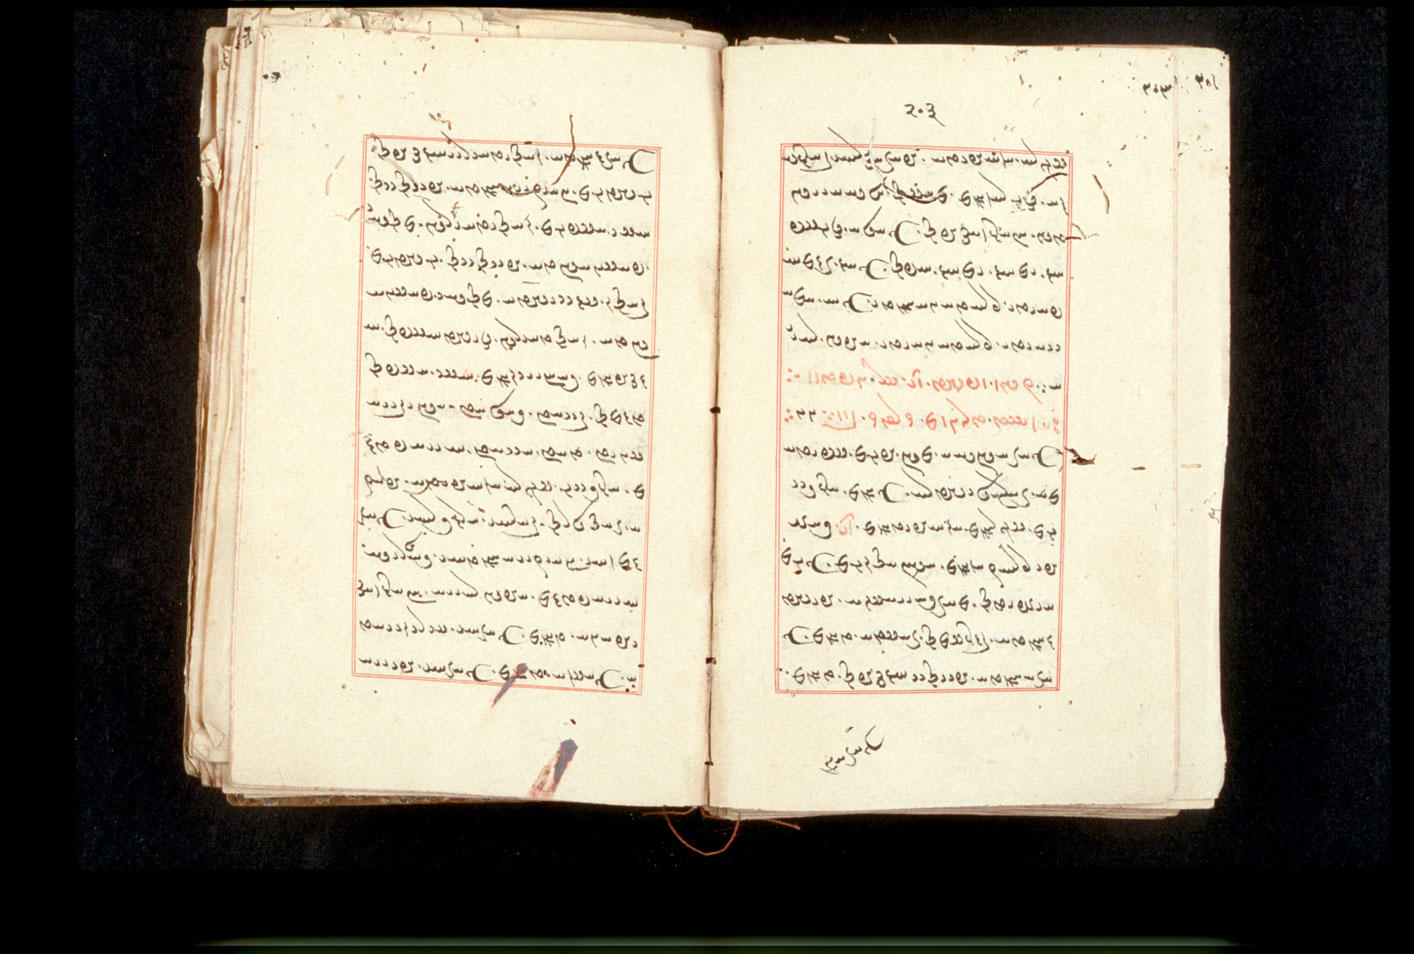 Folios 203v (right) and 204r (left)